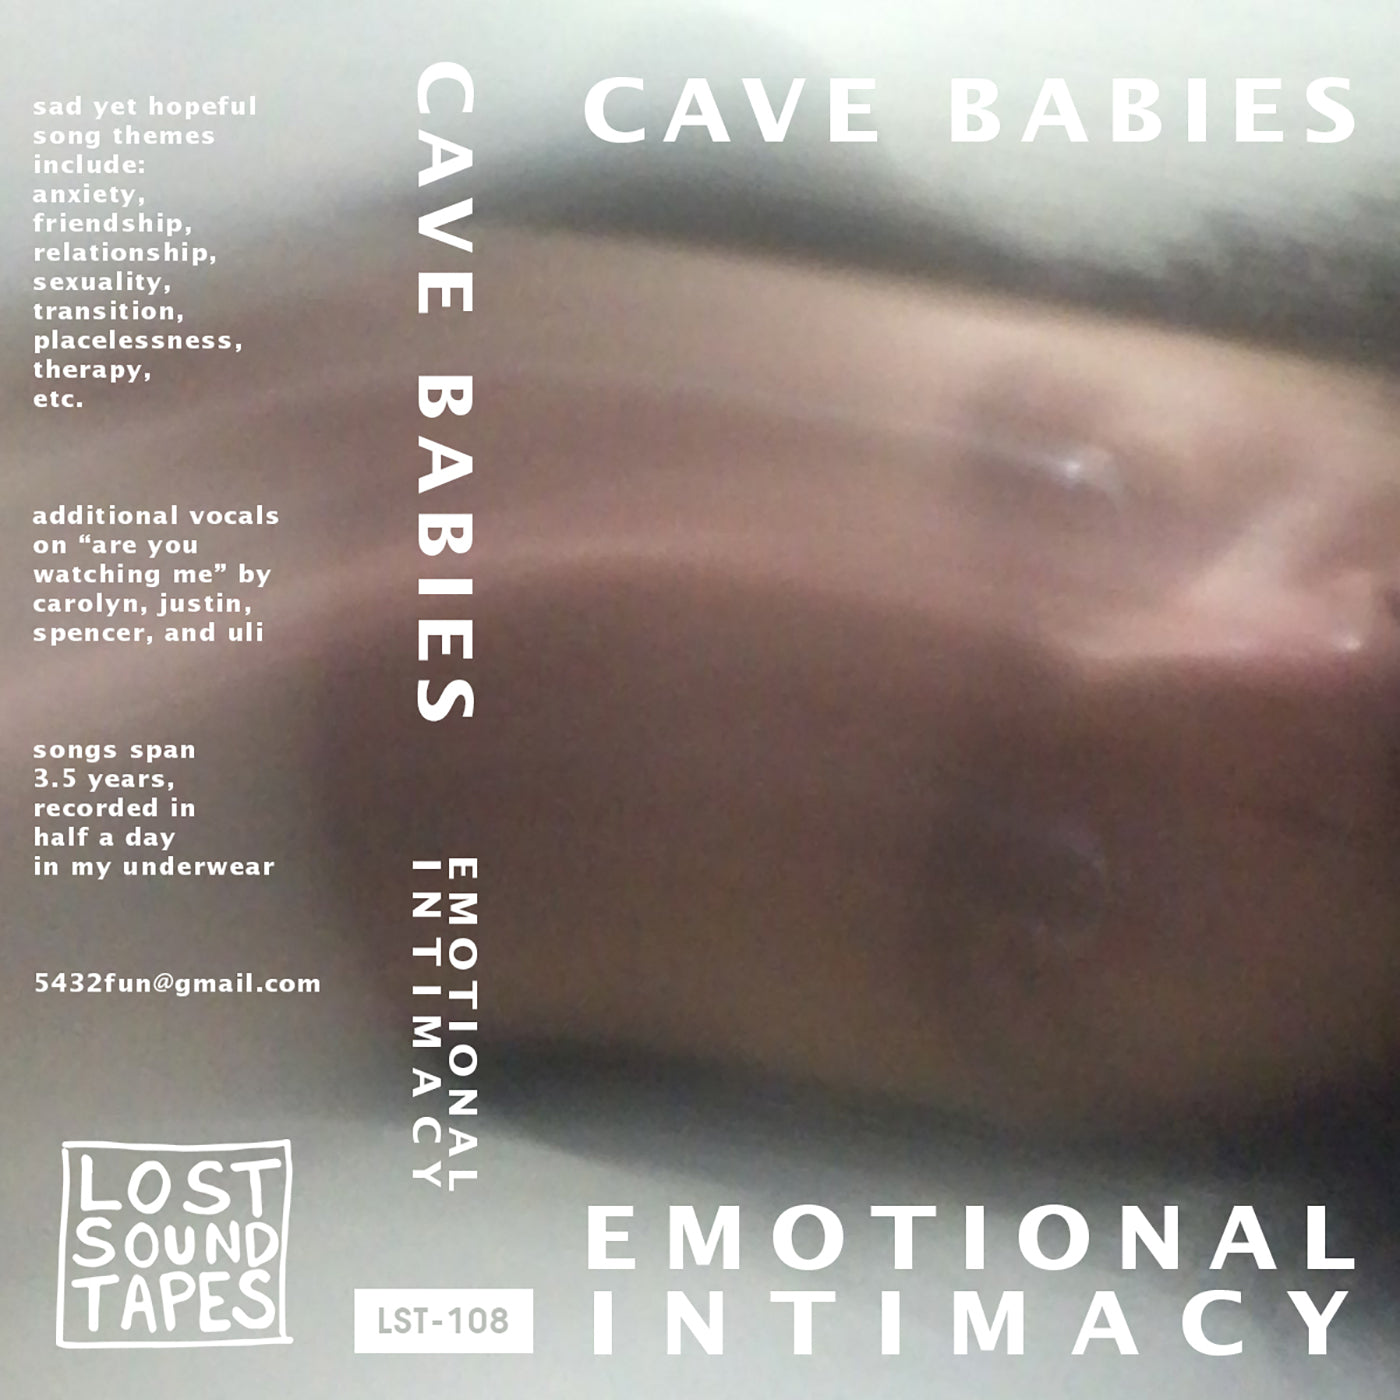 CAVE BABIES "Emotional Intimacy" cassette tape